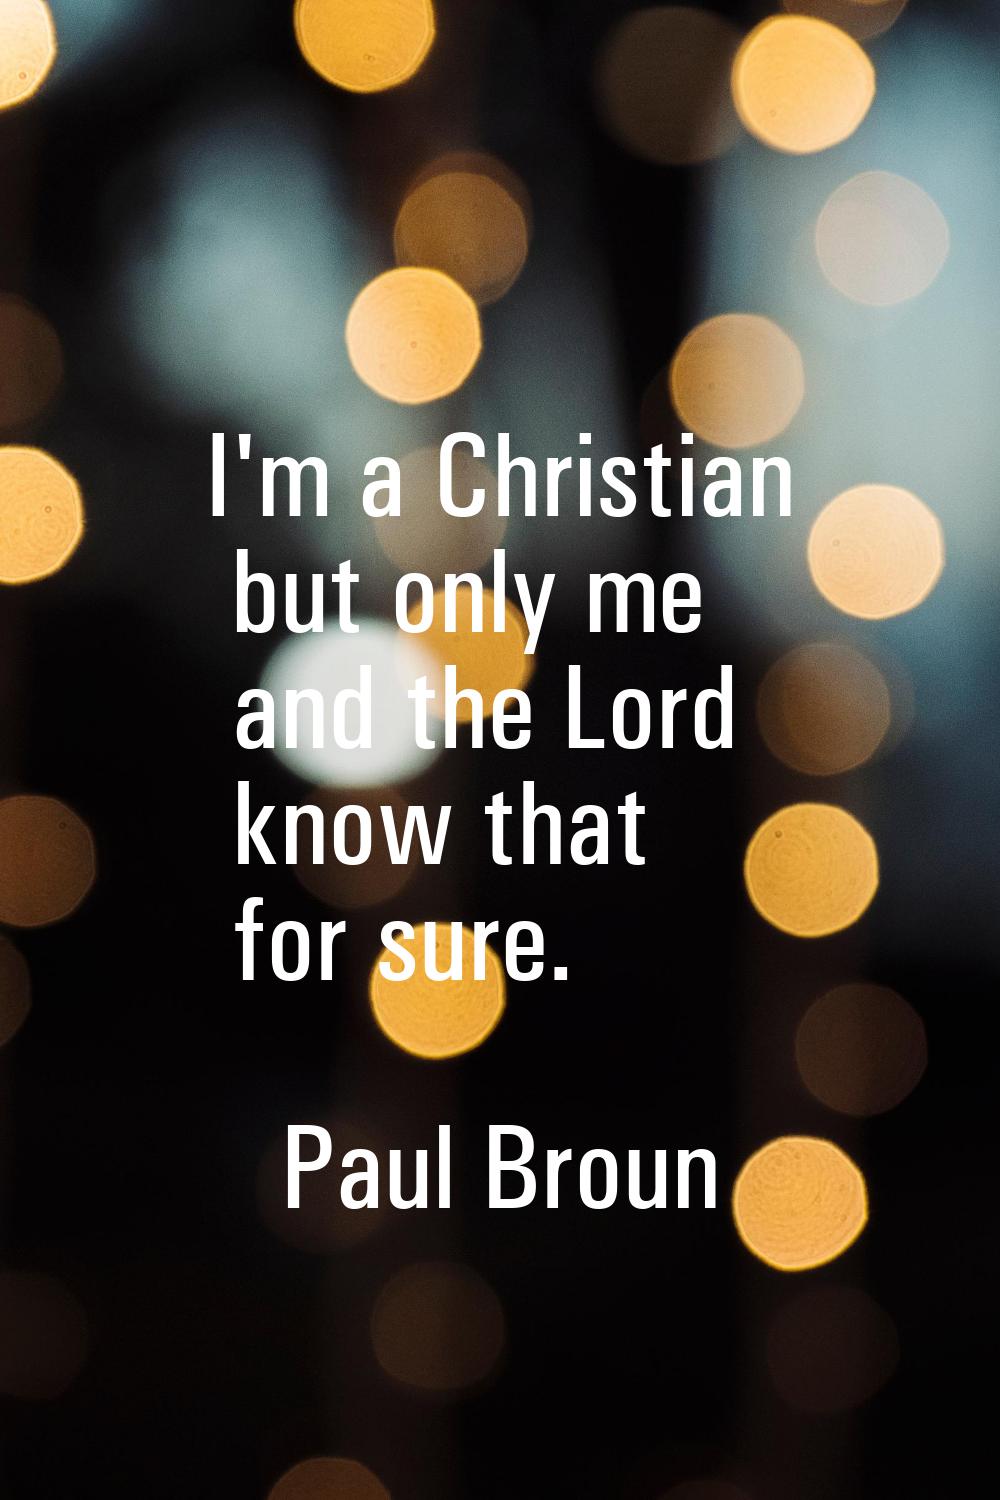 I'm a Christian but only me and the Lord know that for sure.